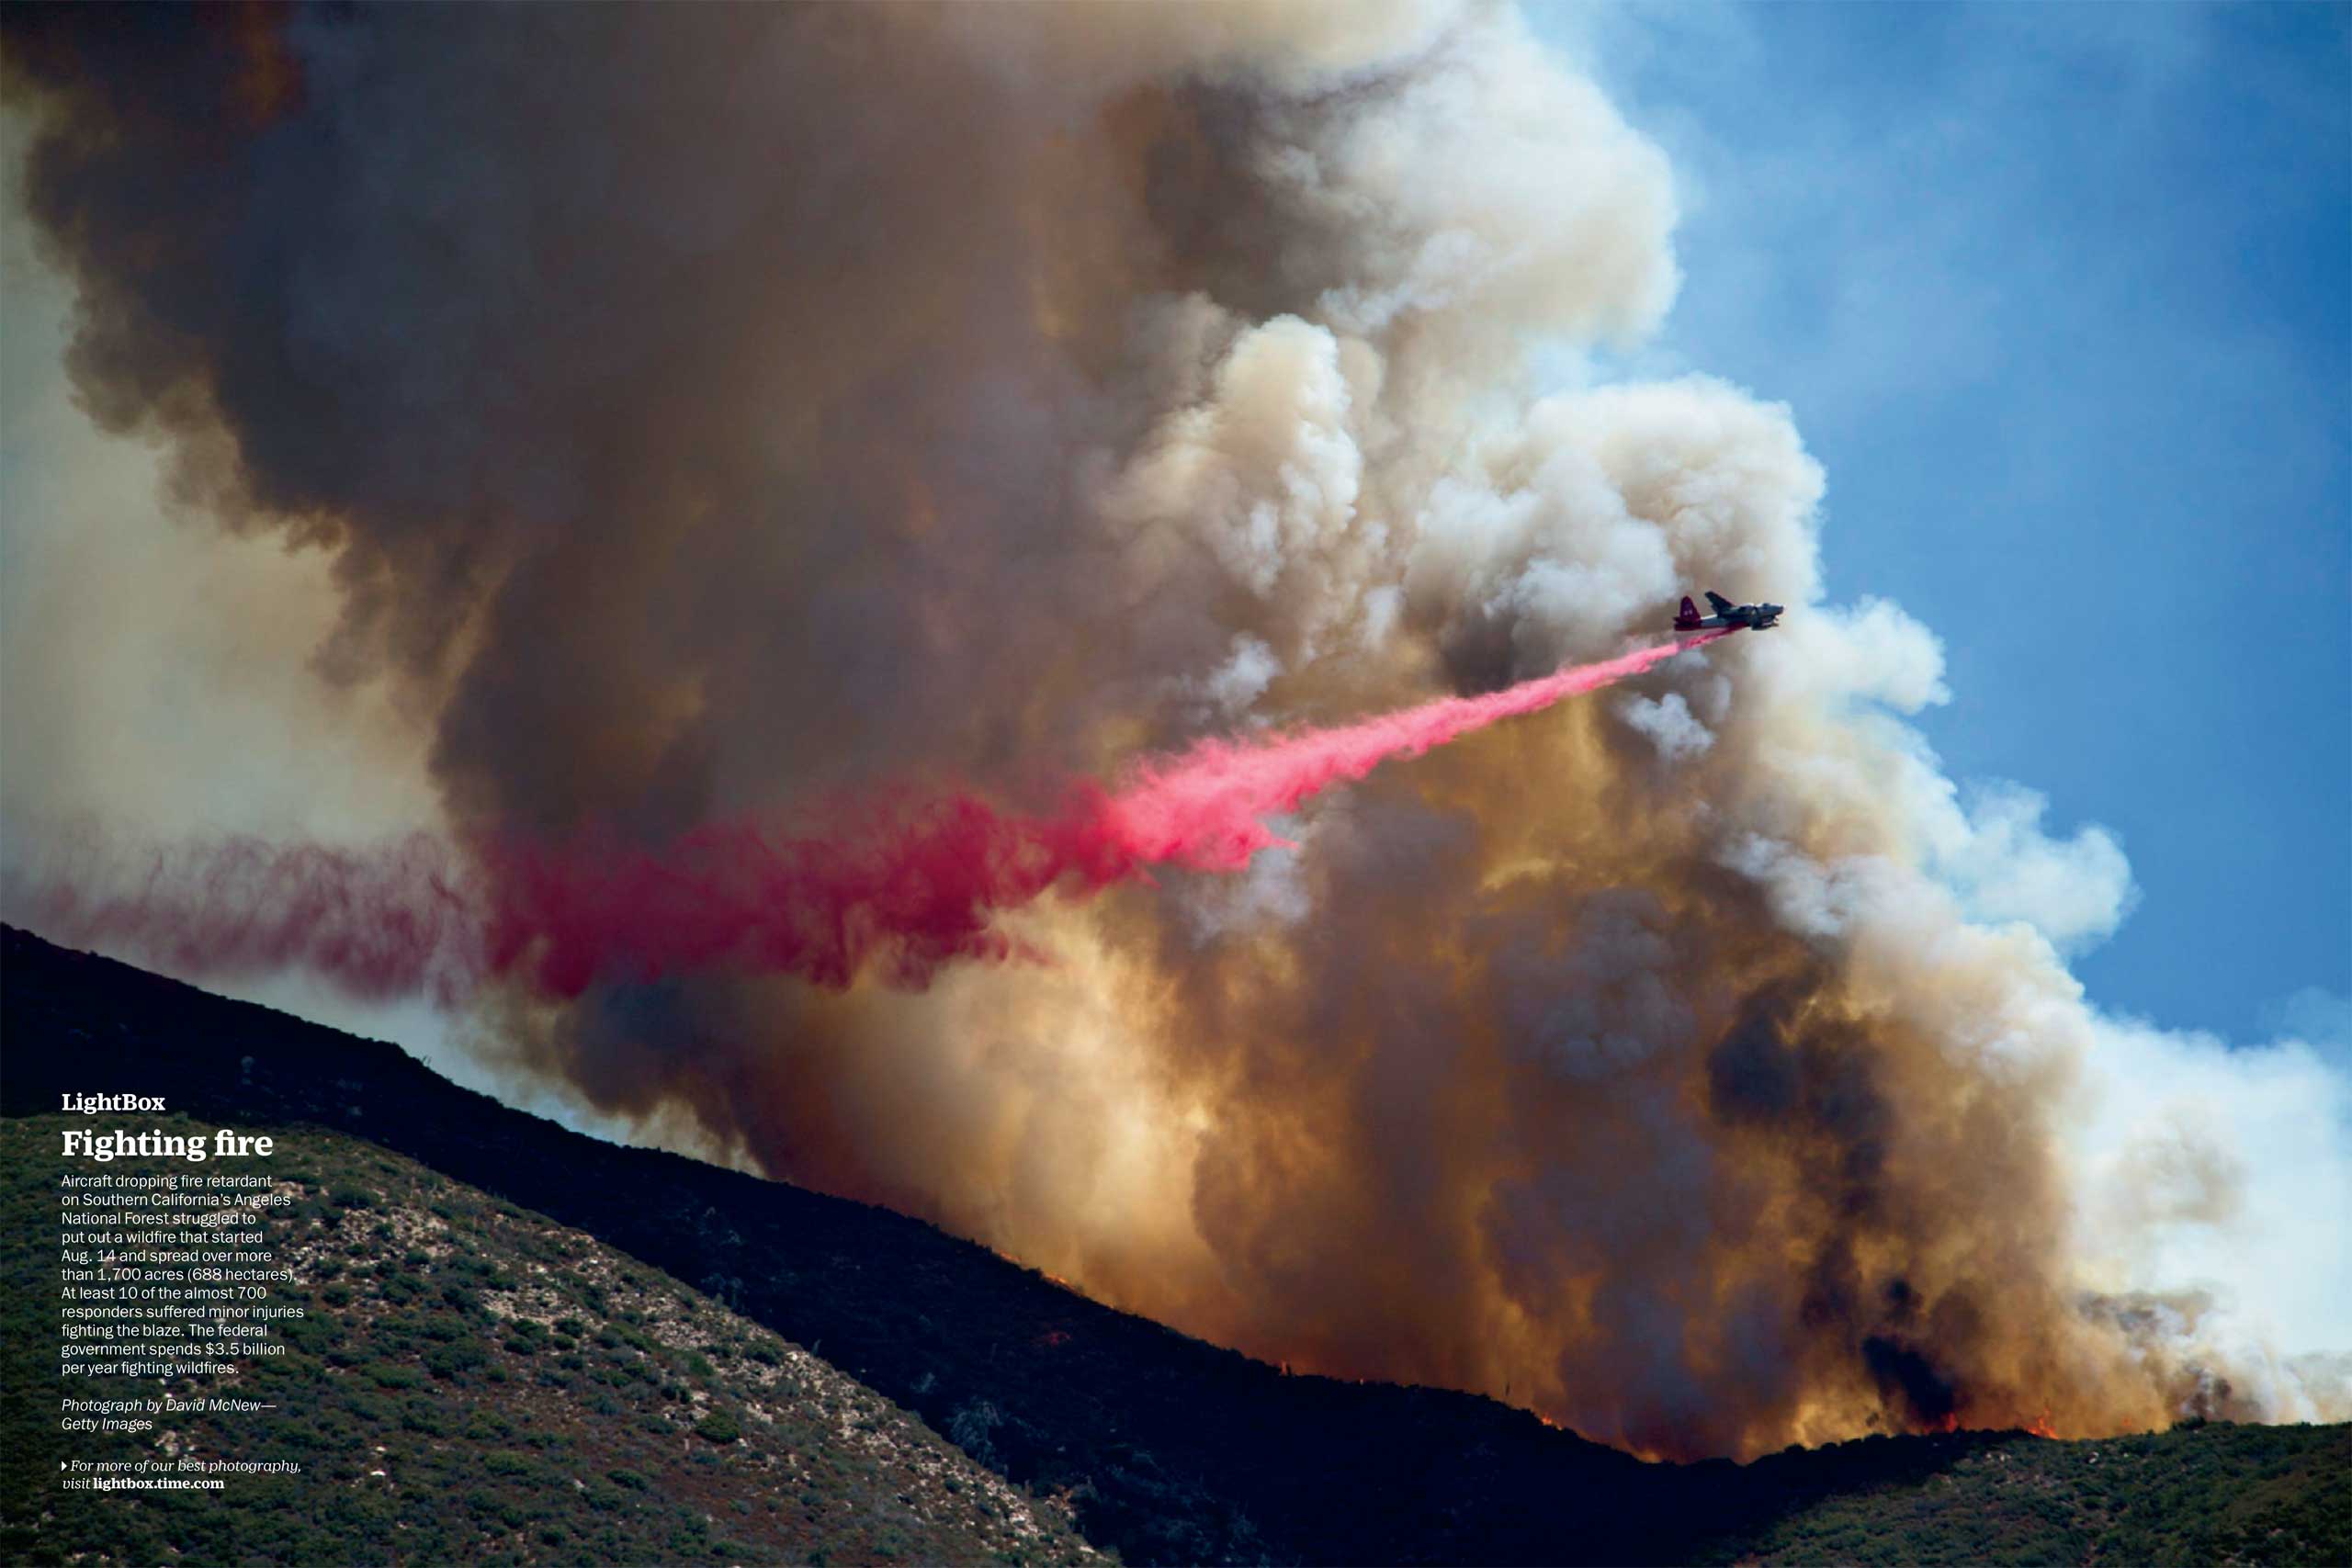 Photograph by David McNew--Getty ImagesAircraft dropping fire retardant on Southern California's Angeles National Forest struggled to put out a wildfire that started Aug. 14 and spread over more than 1,700 acres (688 hectares). At least 10 of the almost 700 responders suffered minor injuries fighting the blaze. The federal government spends $3.5 billion per year fighting wildfires. (TIME issue August 31, 2015)